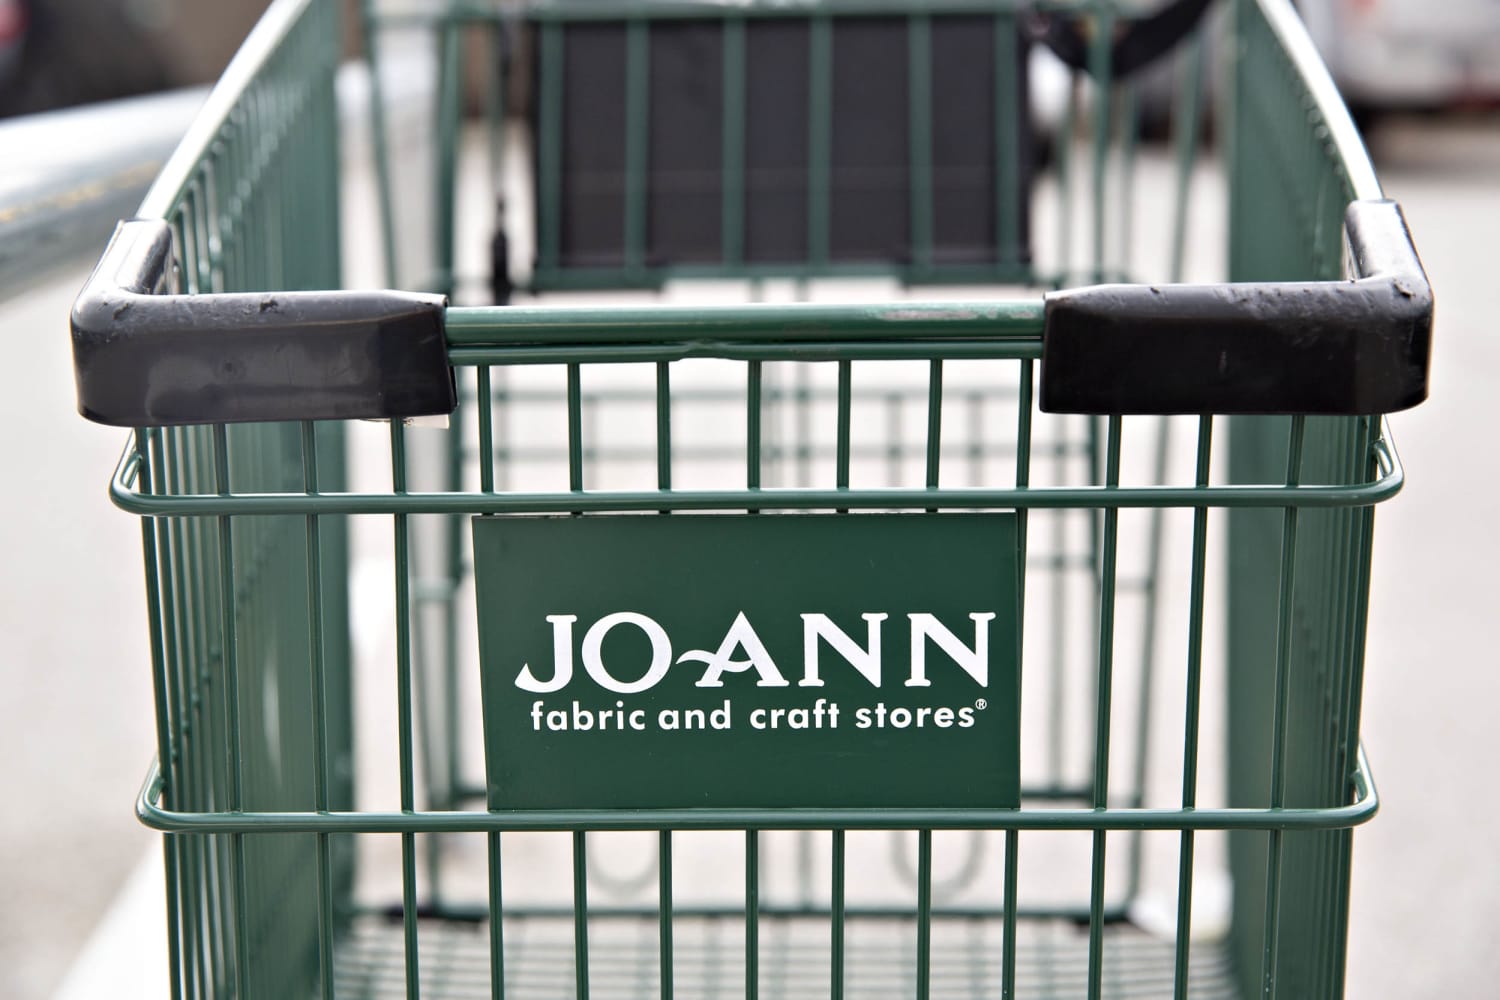 Crafts retailer Joann files for Chapter 11 bankruptcy protection